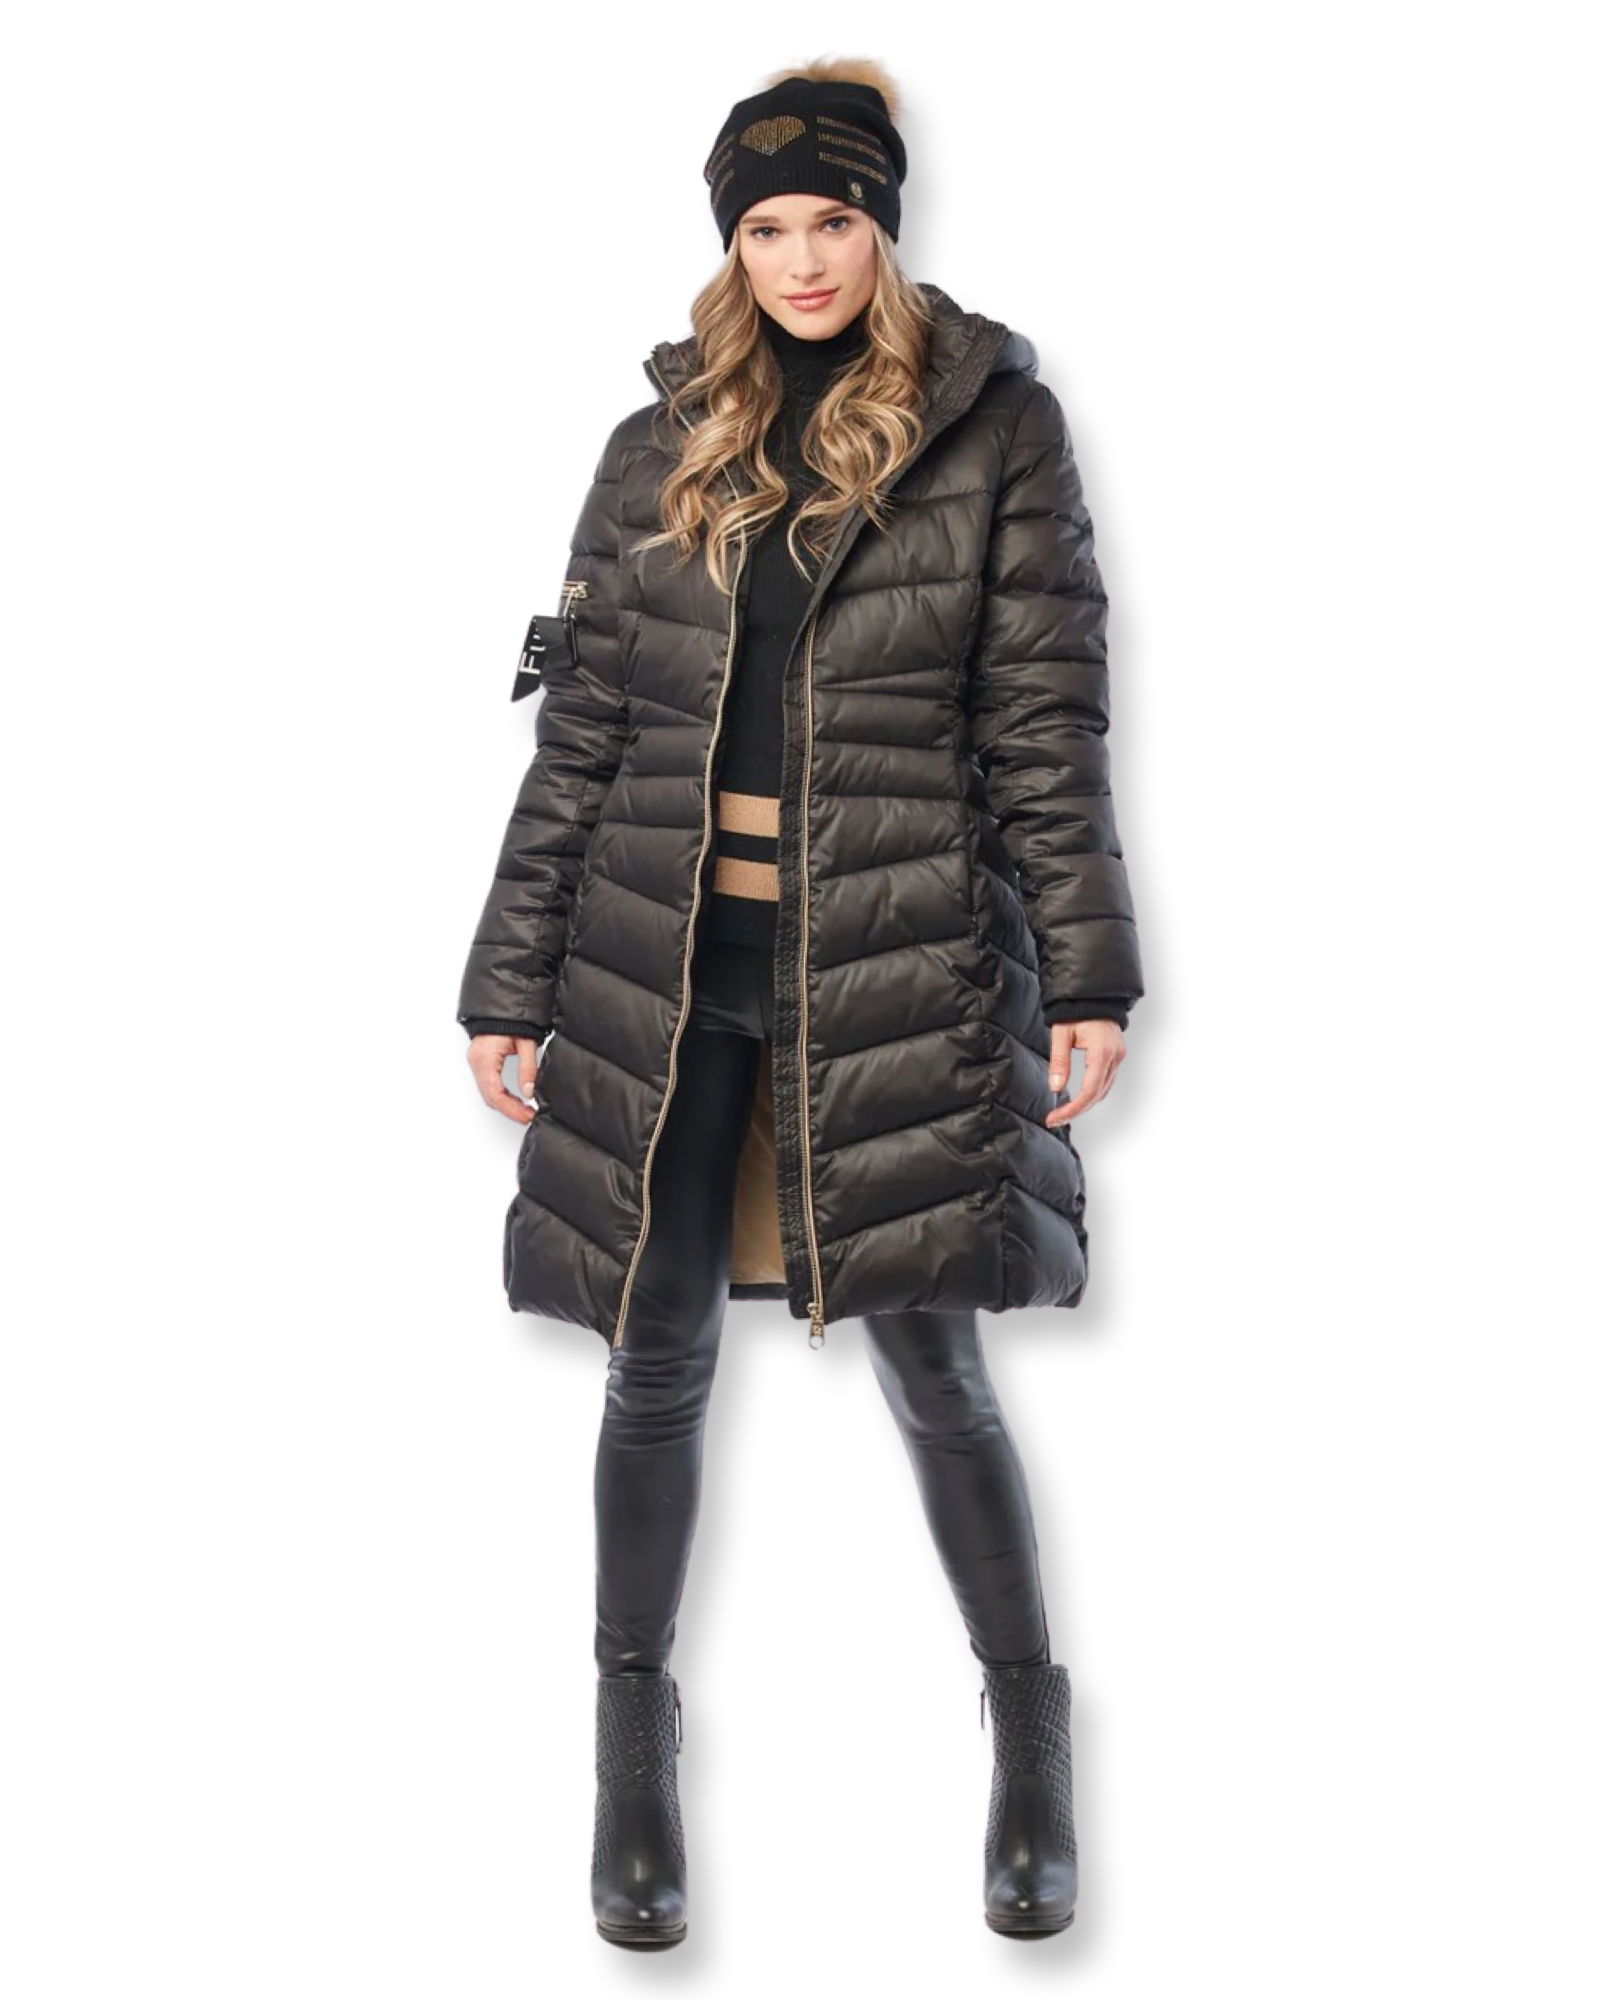 The Perfect Winter Coat for Sale